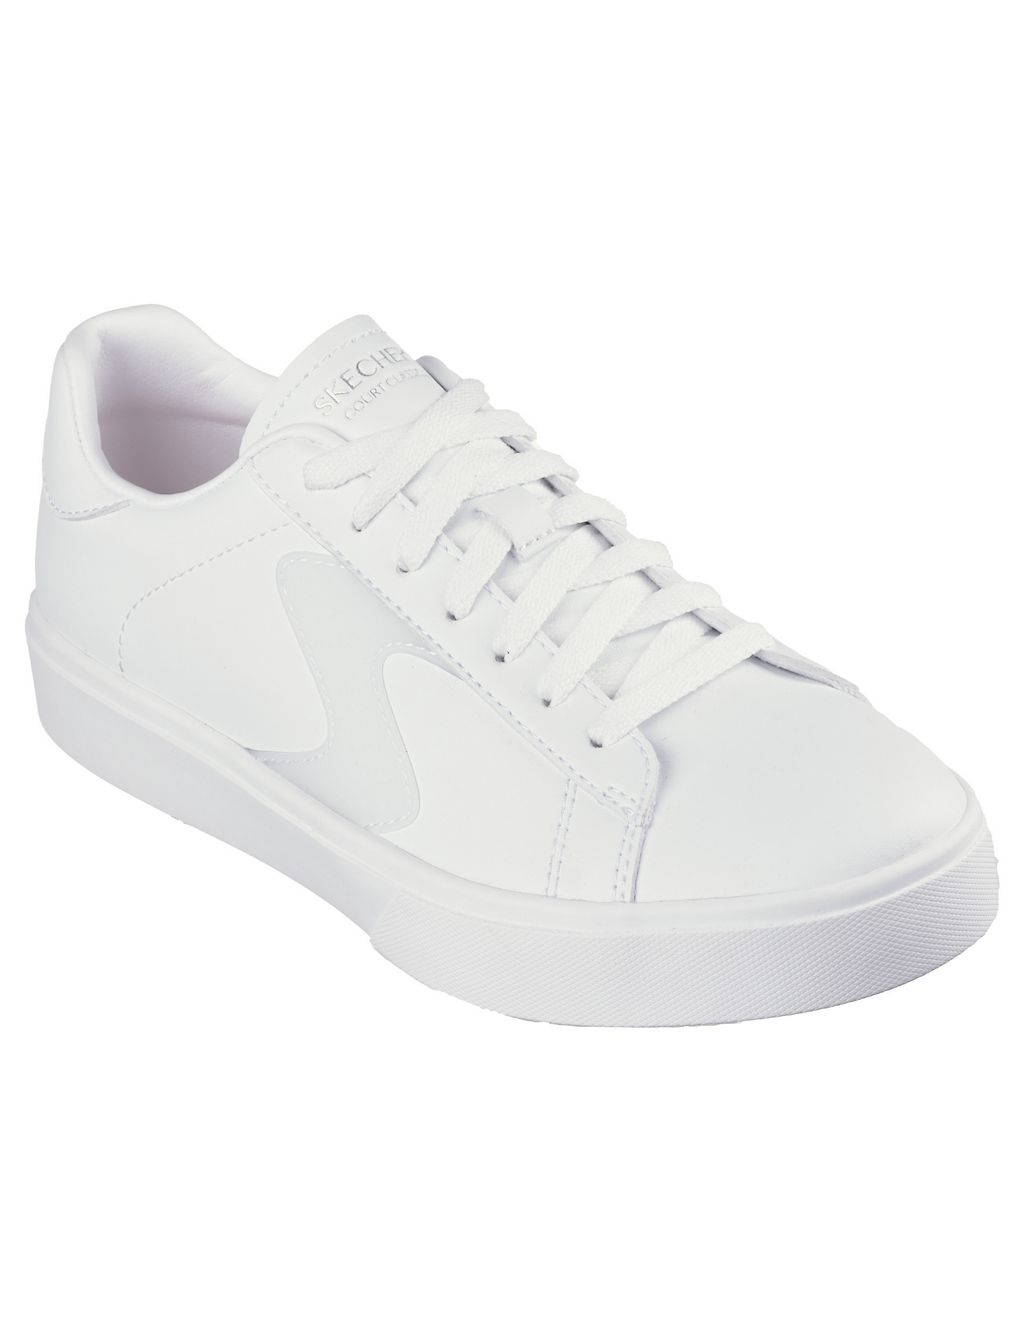 Eden LX Top Grade Lace Up Trainers 1 of 5